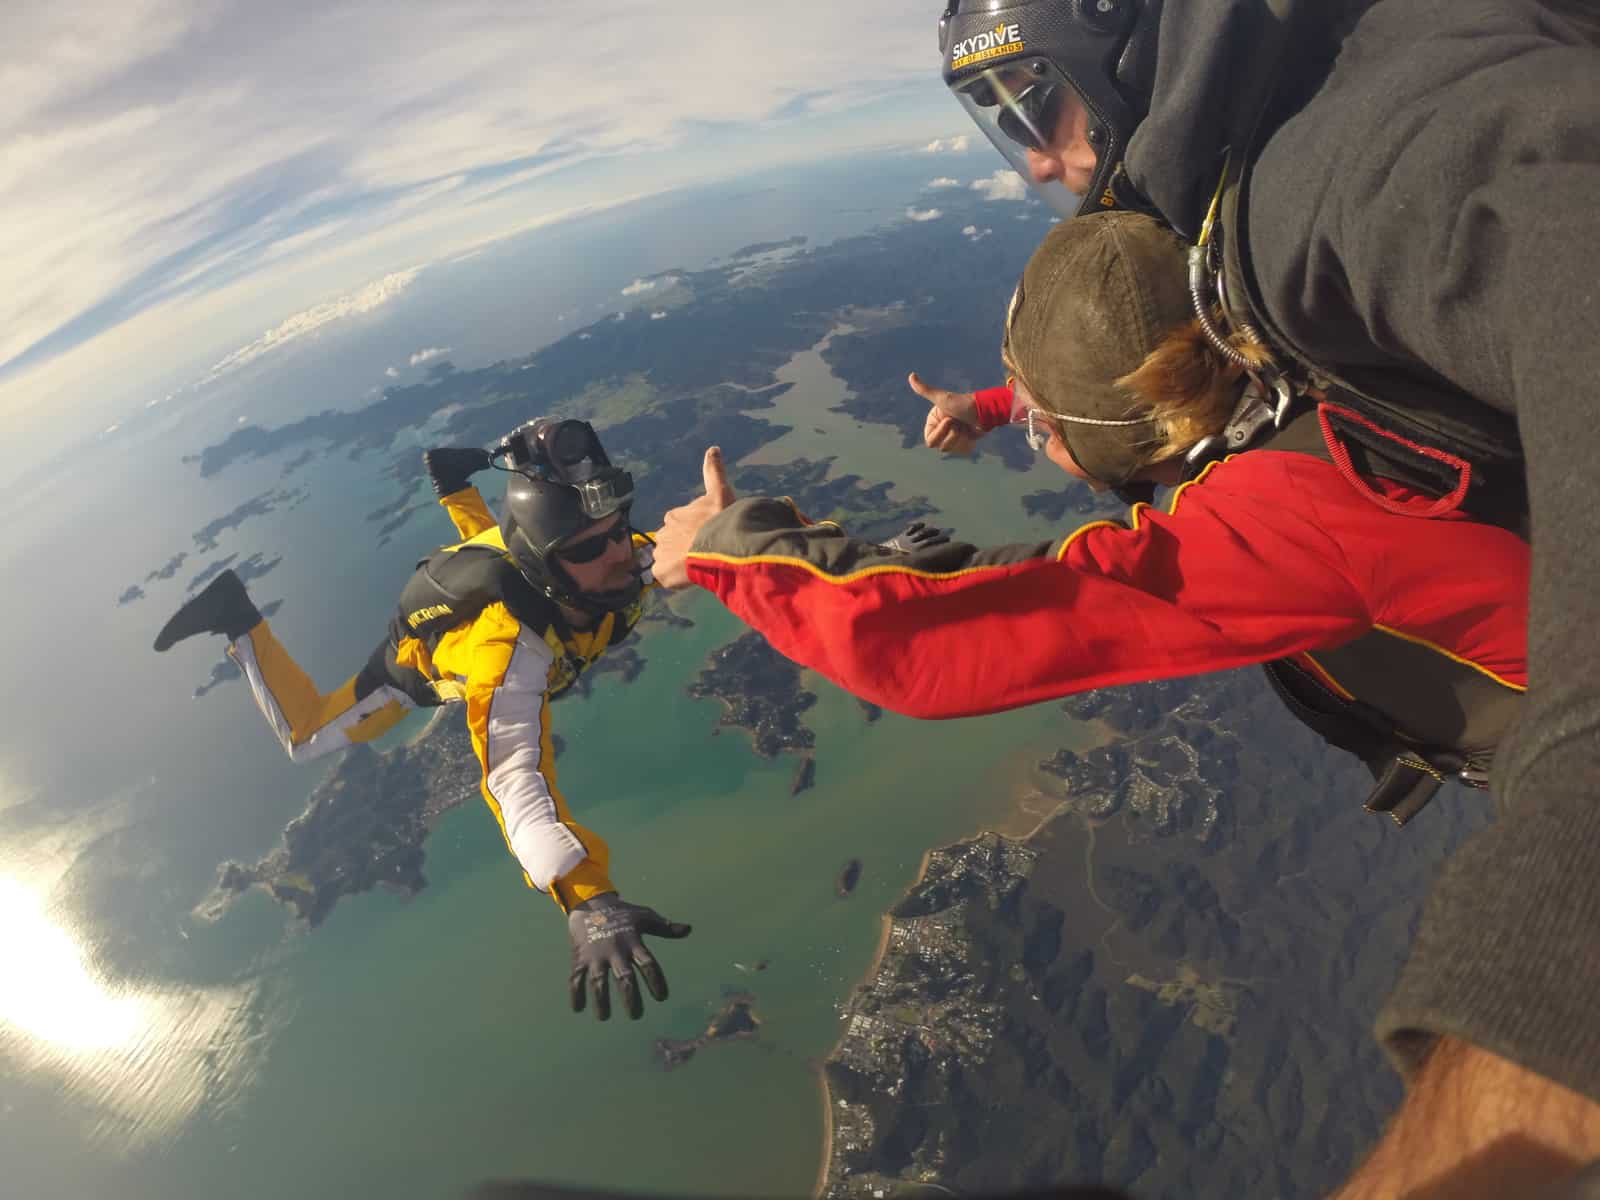 Stray NZ - Skydive Bay of Islands - tips for perfect skydive photos